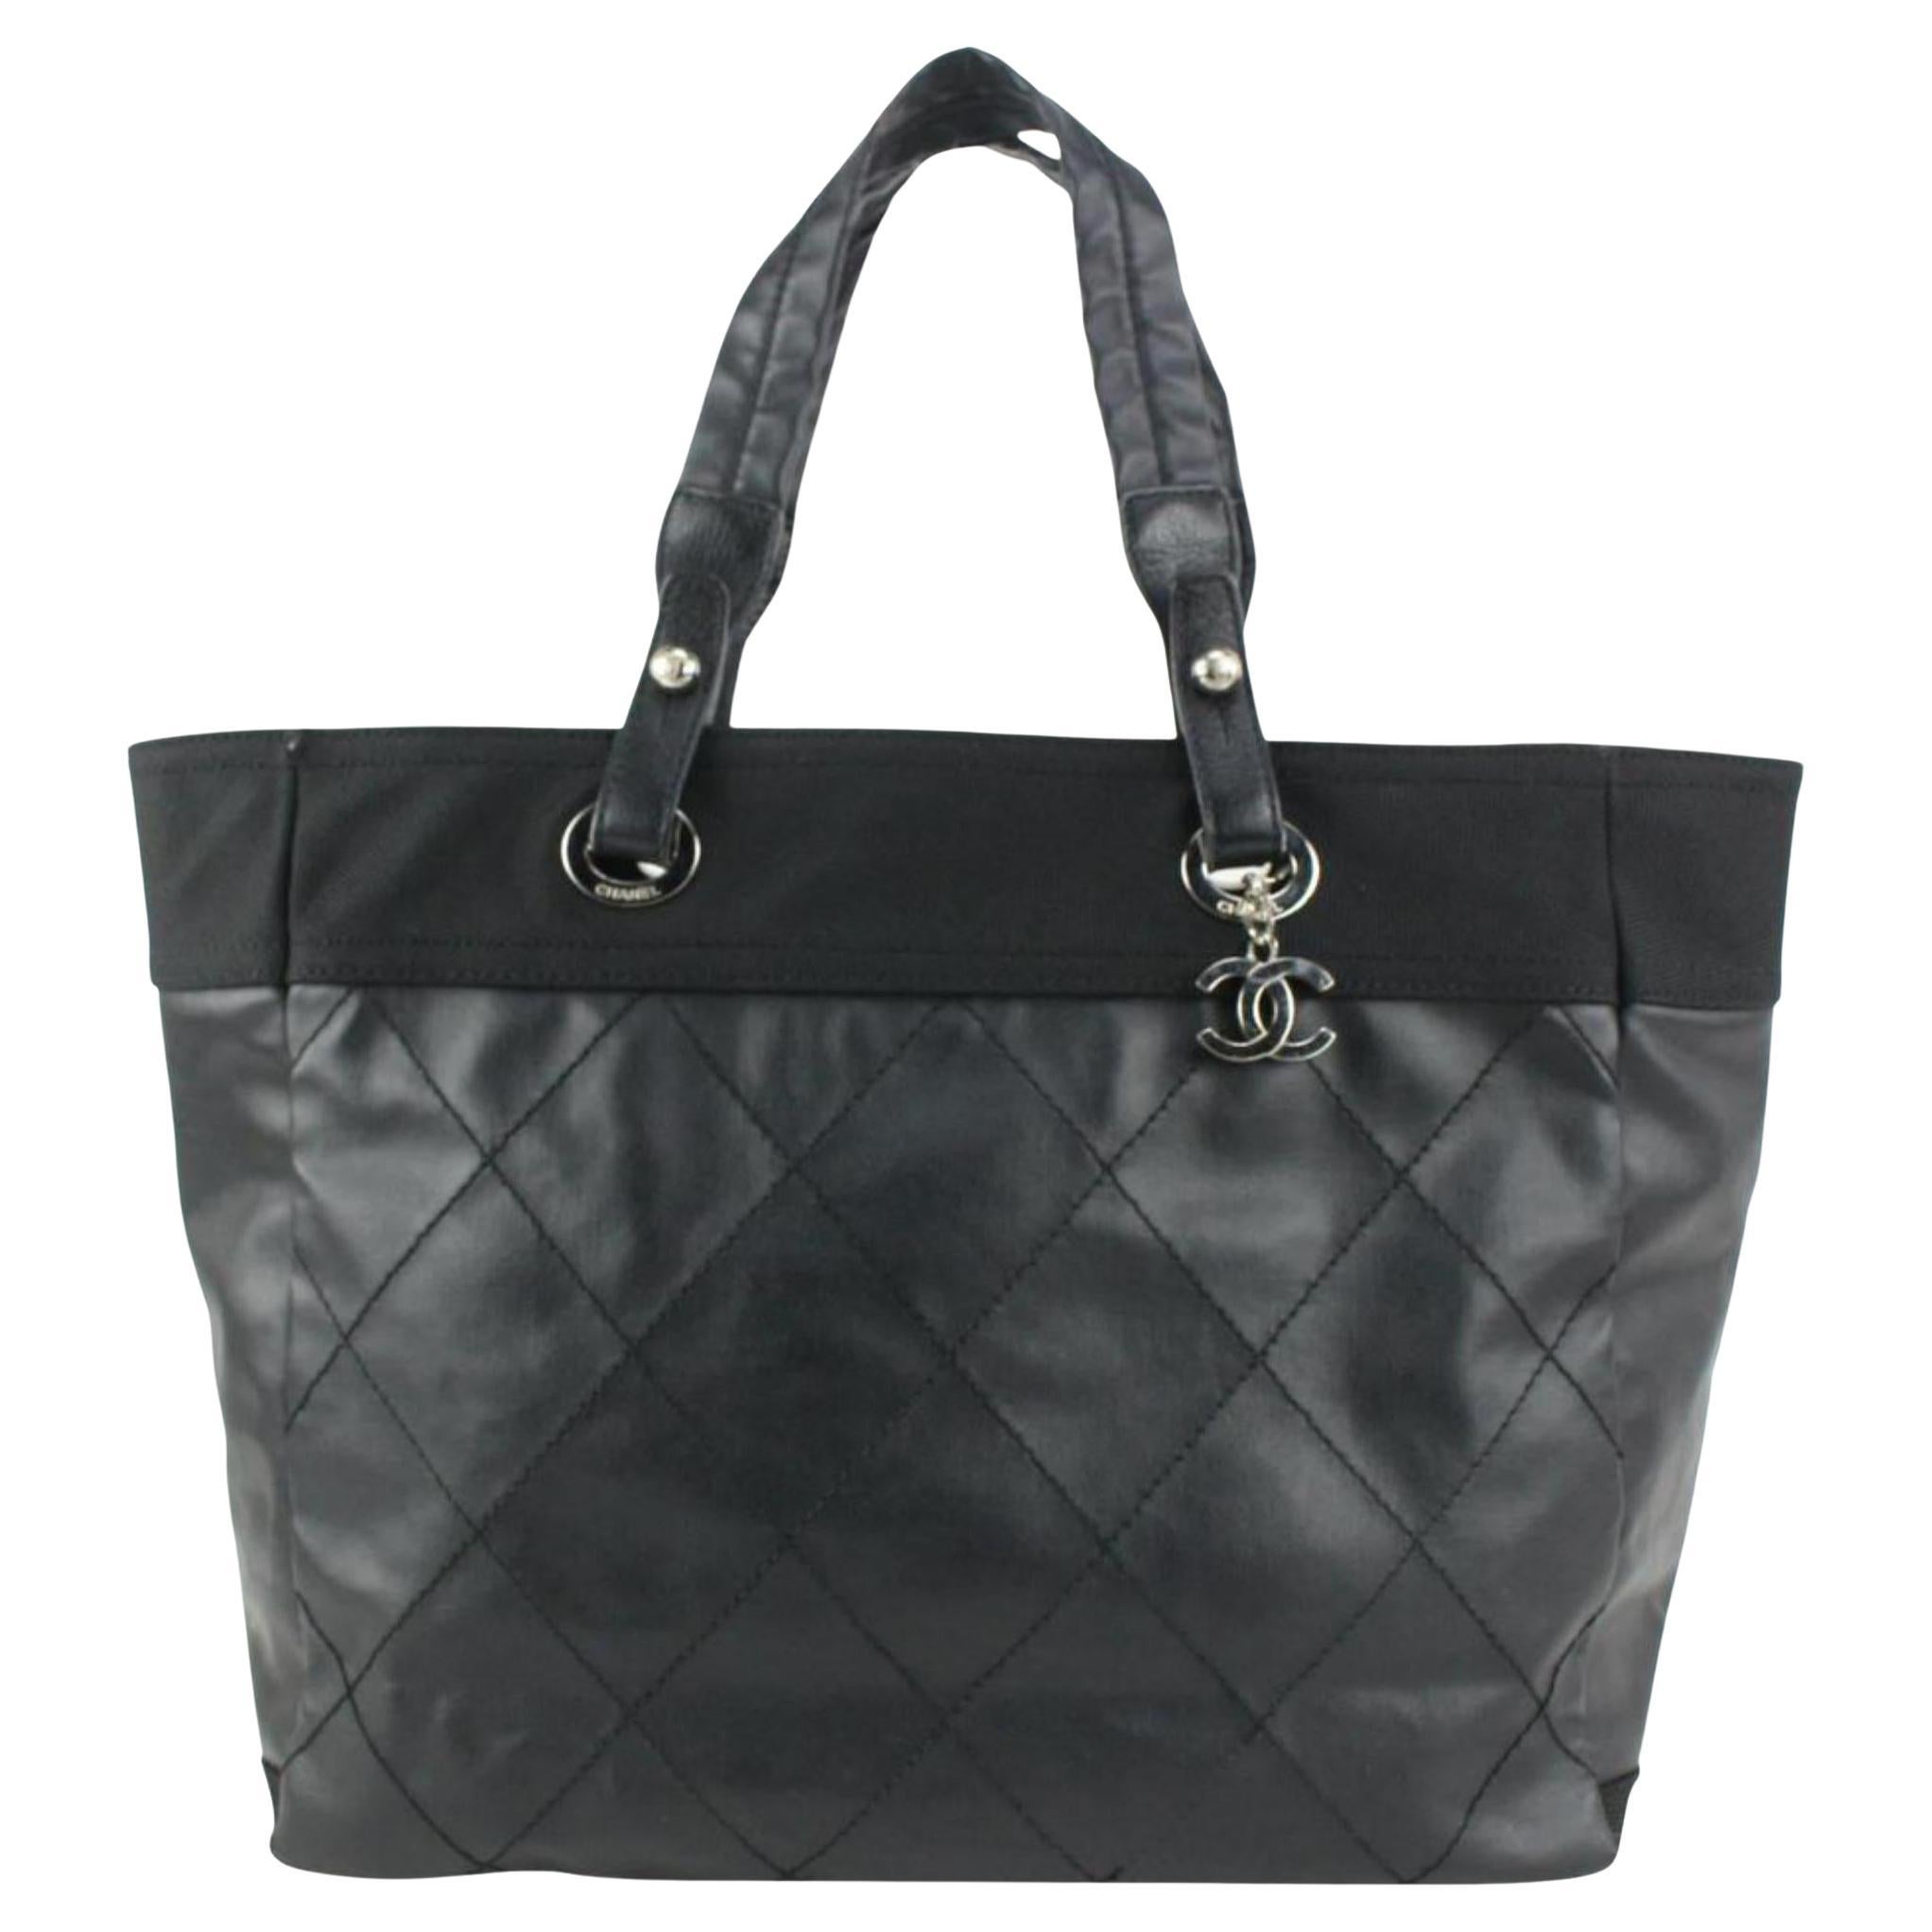 Chanel Large Black Quilted Biarritz GM Tote Bag 927ca51